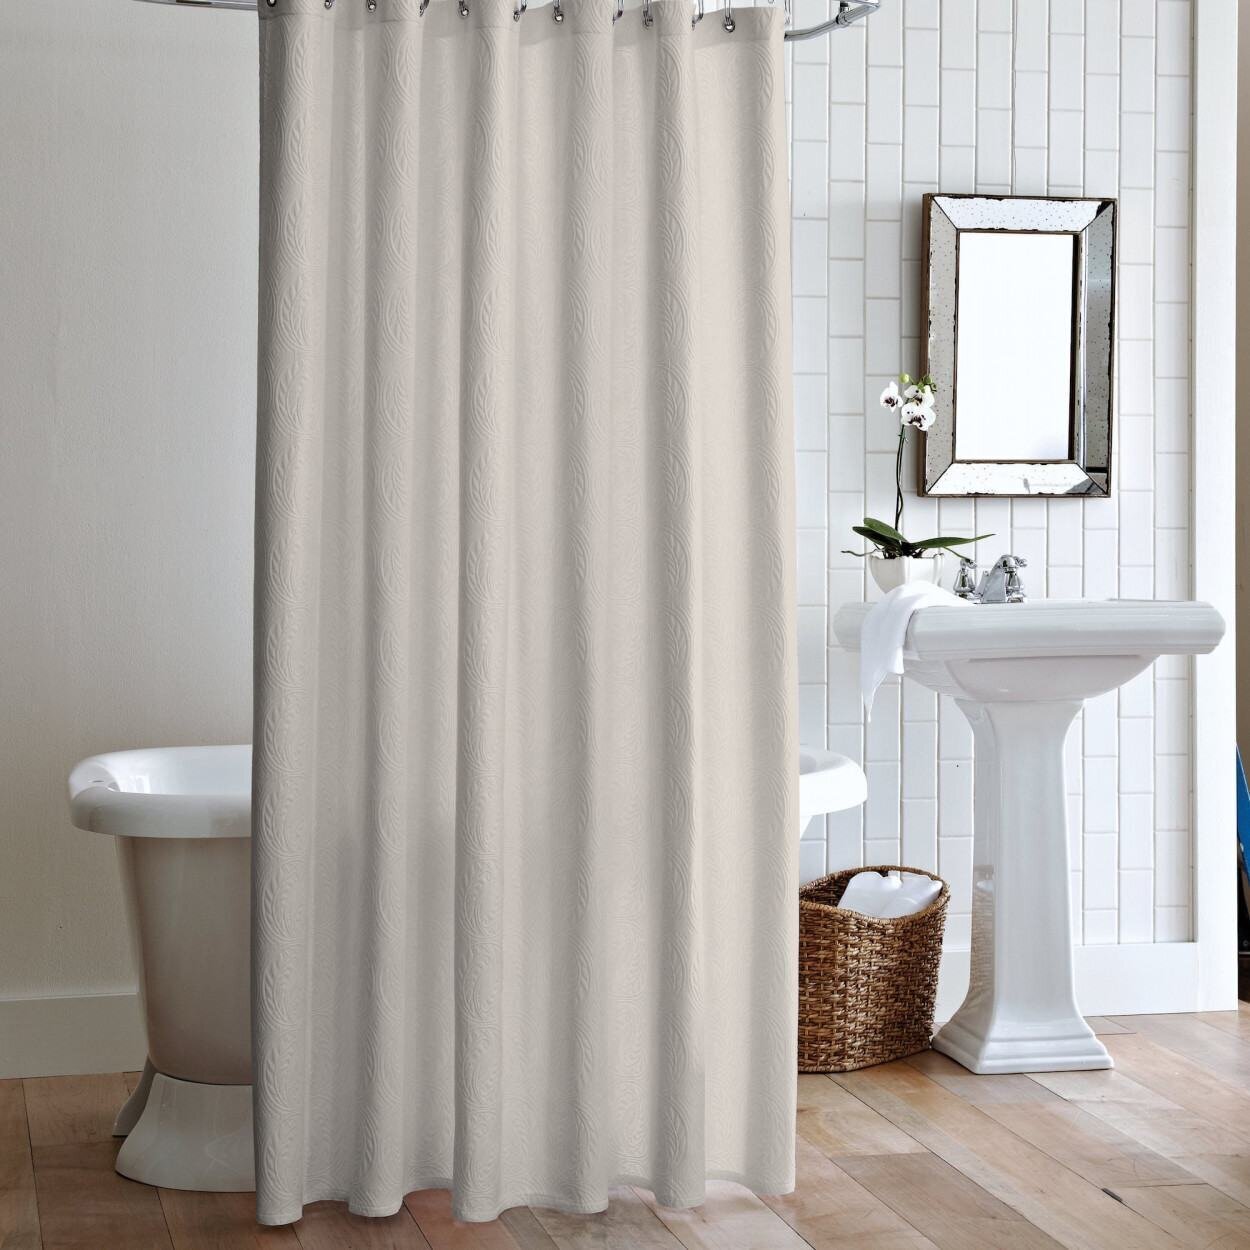 Timeless luxury shower curtains